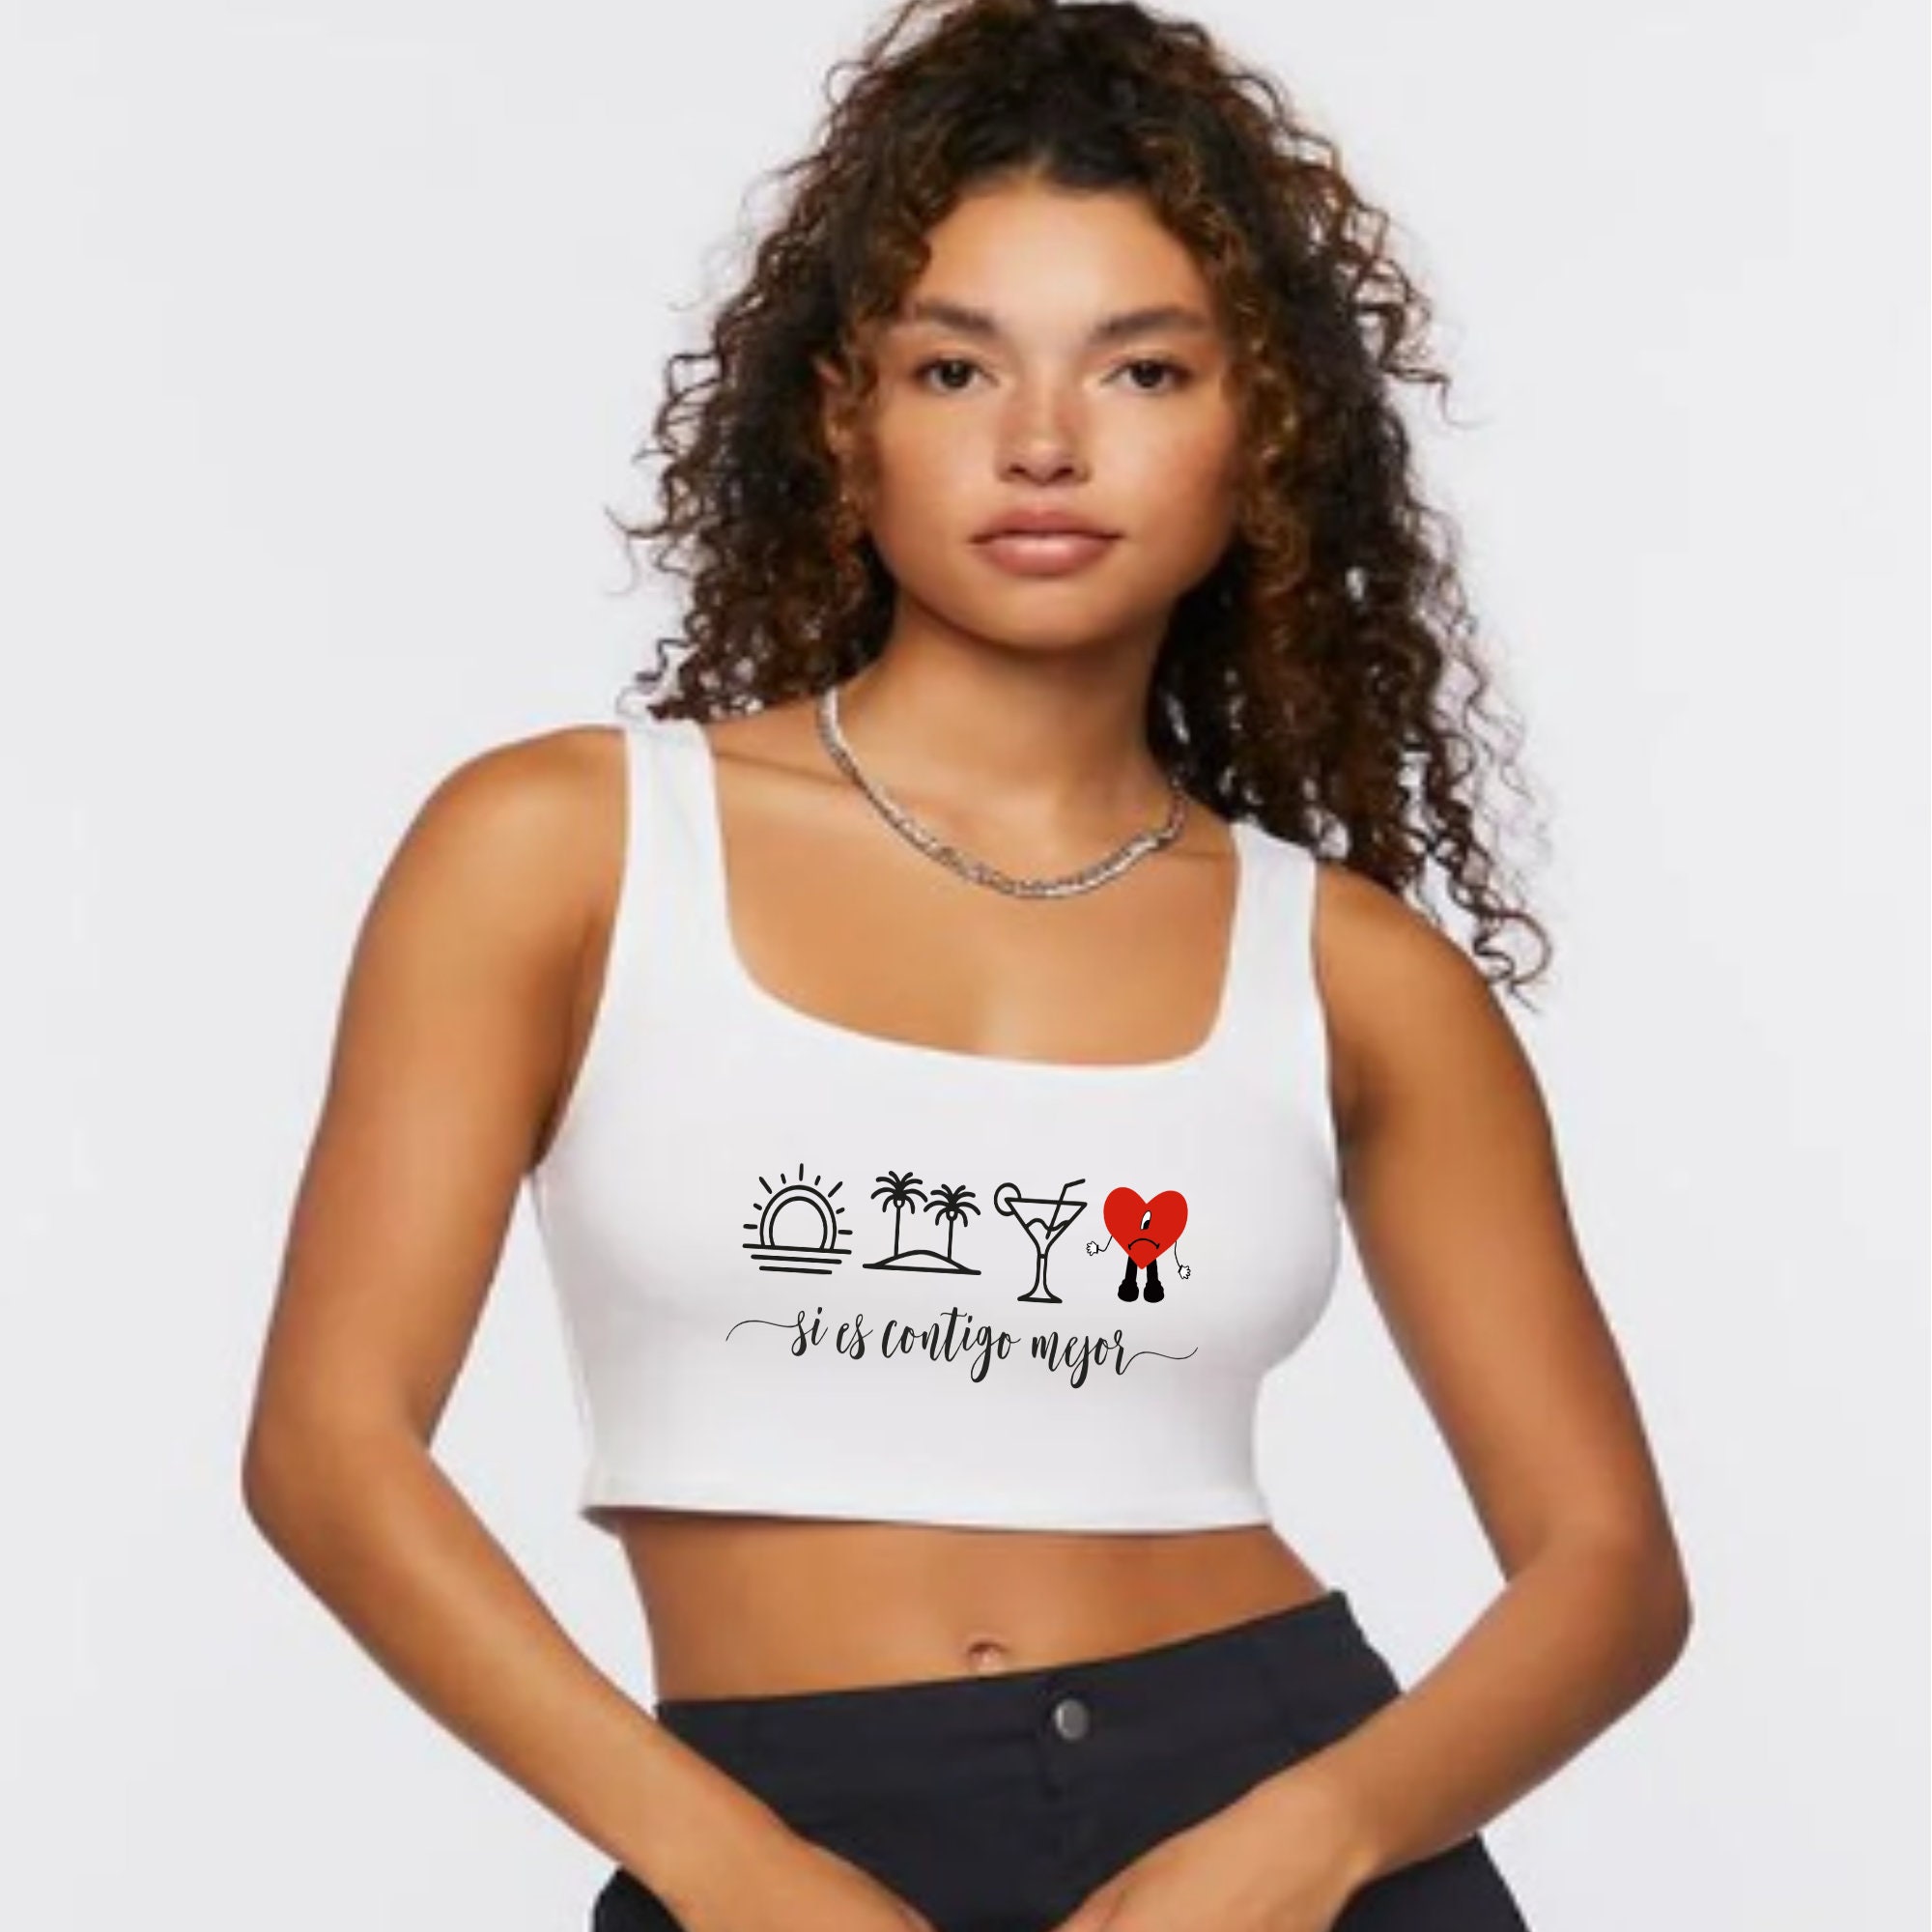 Tube Top World’s Hottest Tour Kleding Dameskleding Tops & T-shirts Croptops & Bandeautops Bandeautops Crop Top Bad Bunny Merch Bad Bunny Embroidered Cropped Tube Top Tank Top 